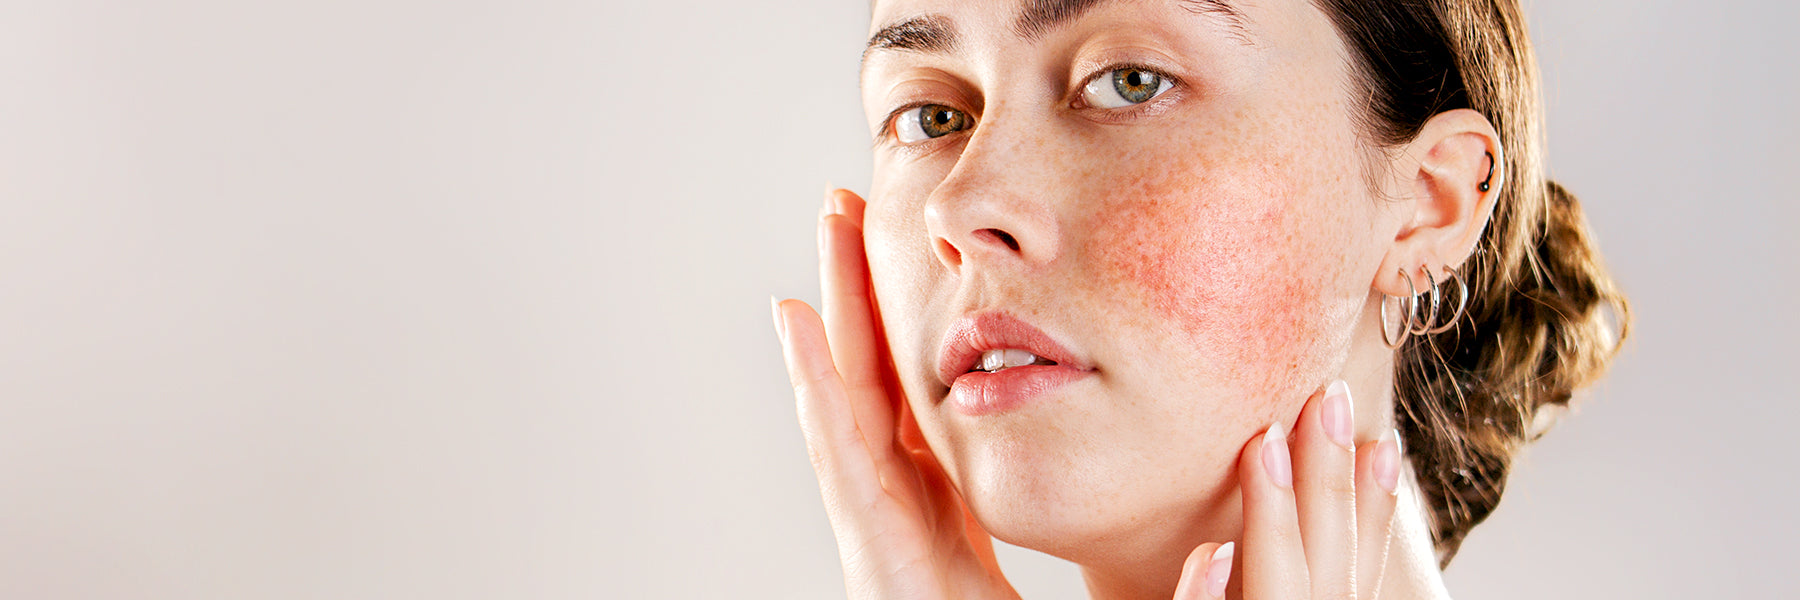 How To Keep Redness Under Control